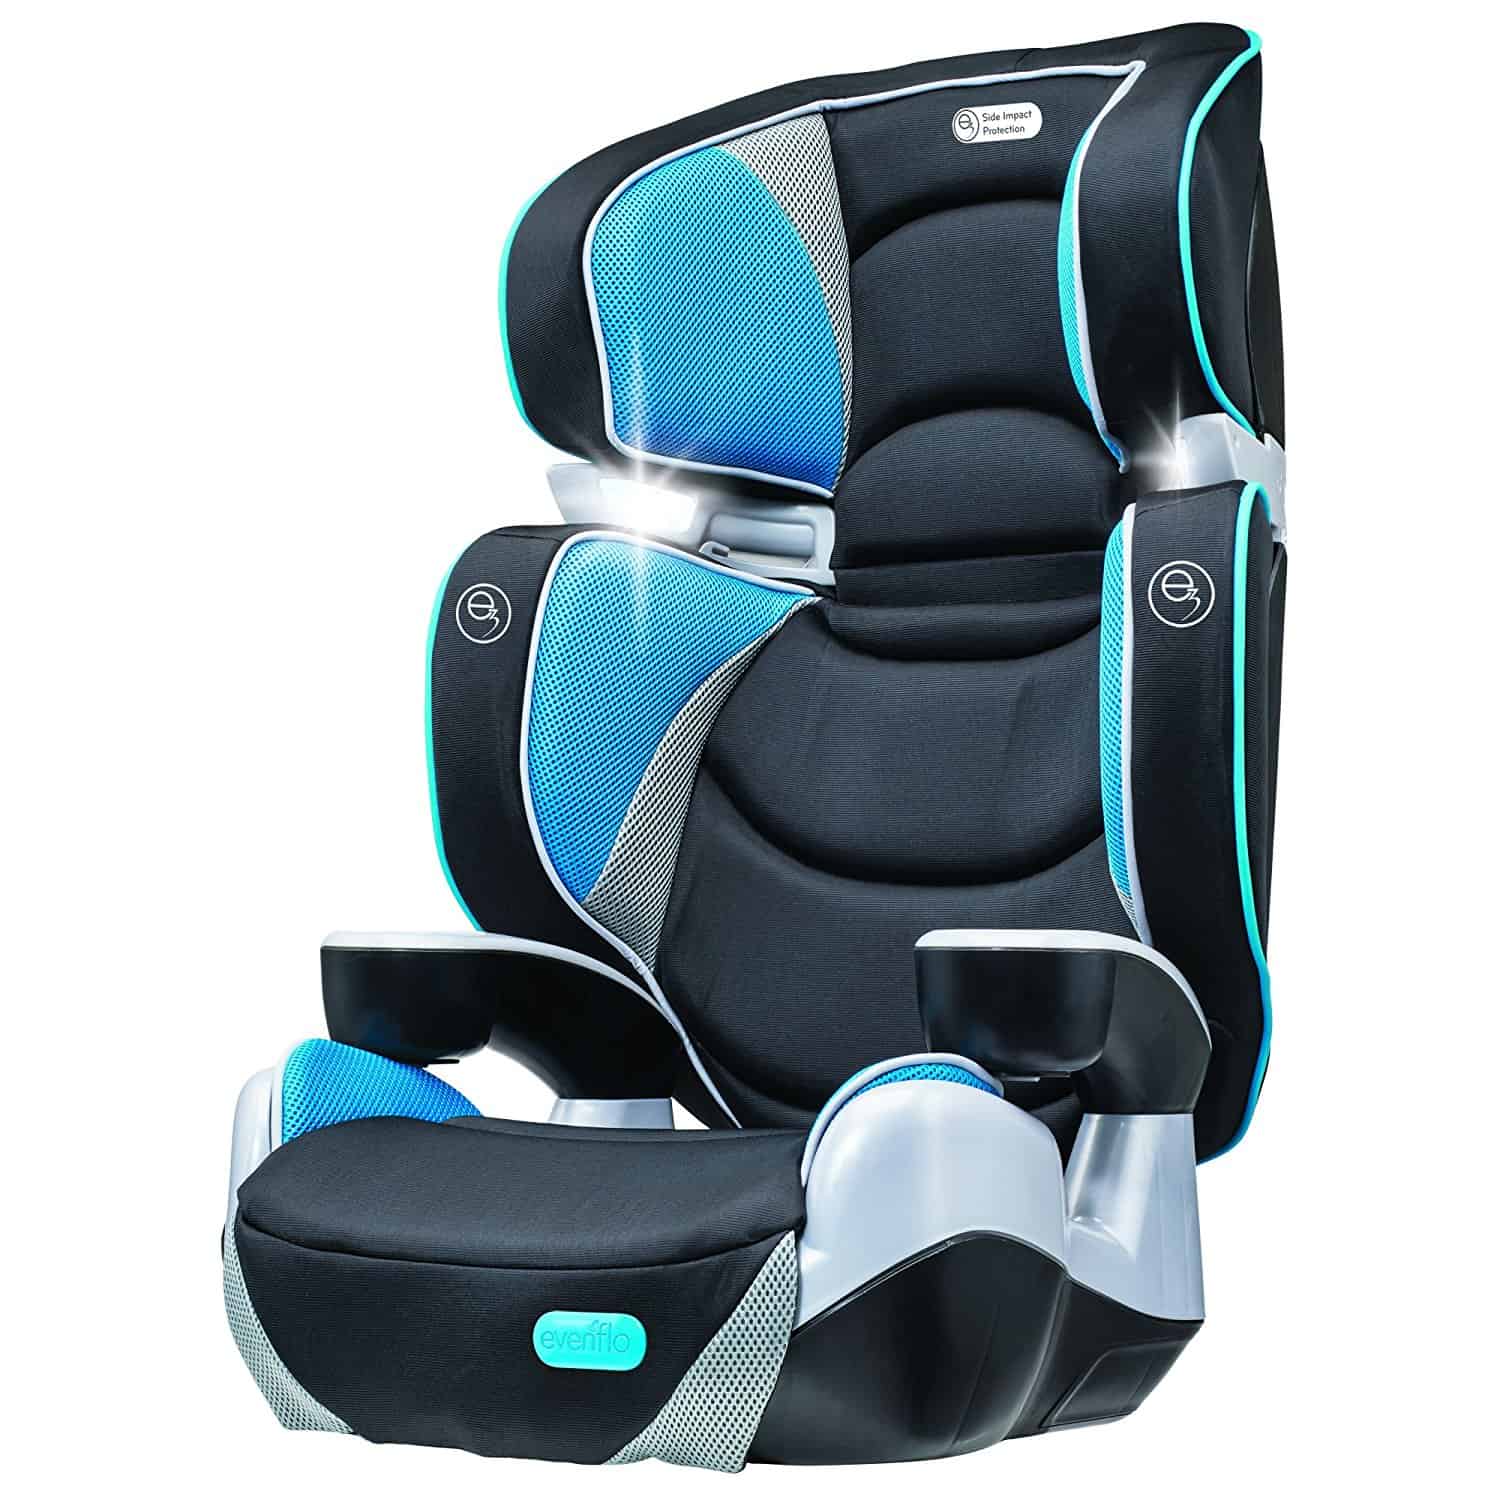 Booster Car Seat review: Evenflo 